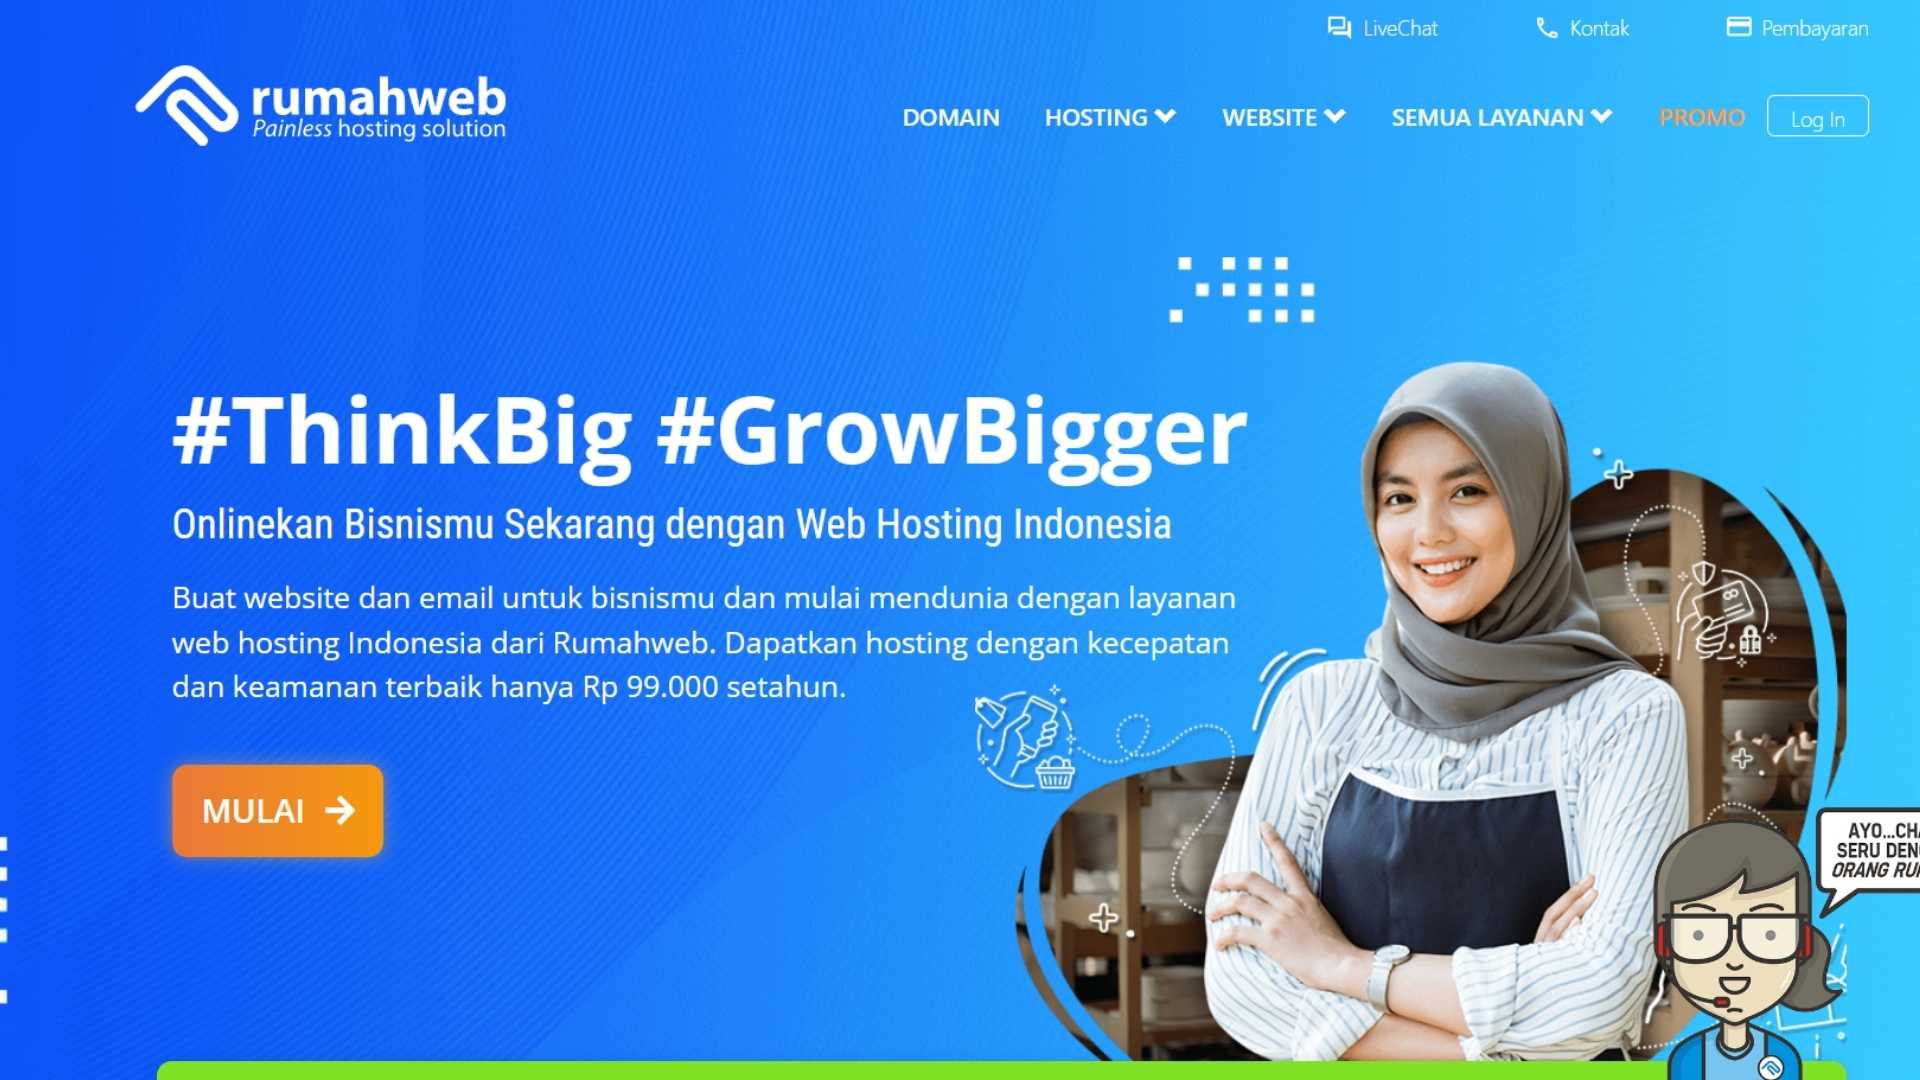 Review Hosting Rumahweb, Apakah Recommended?